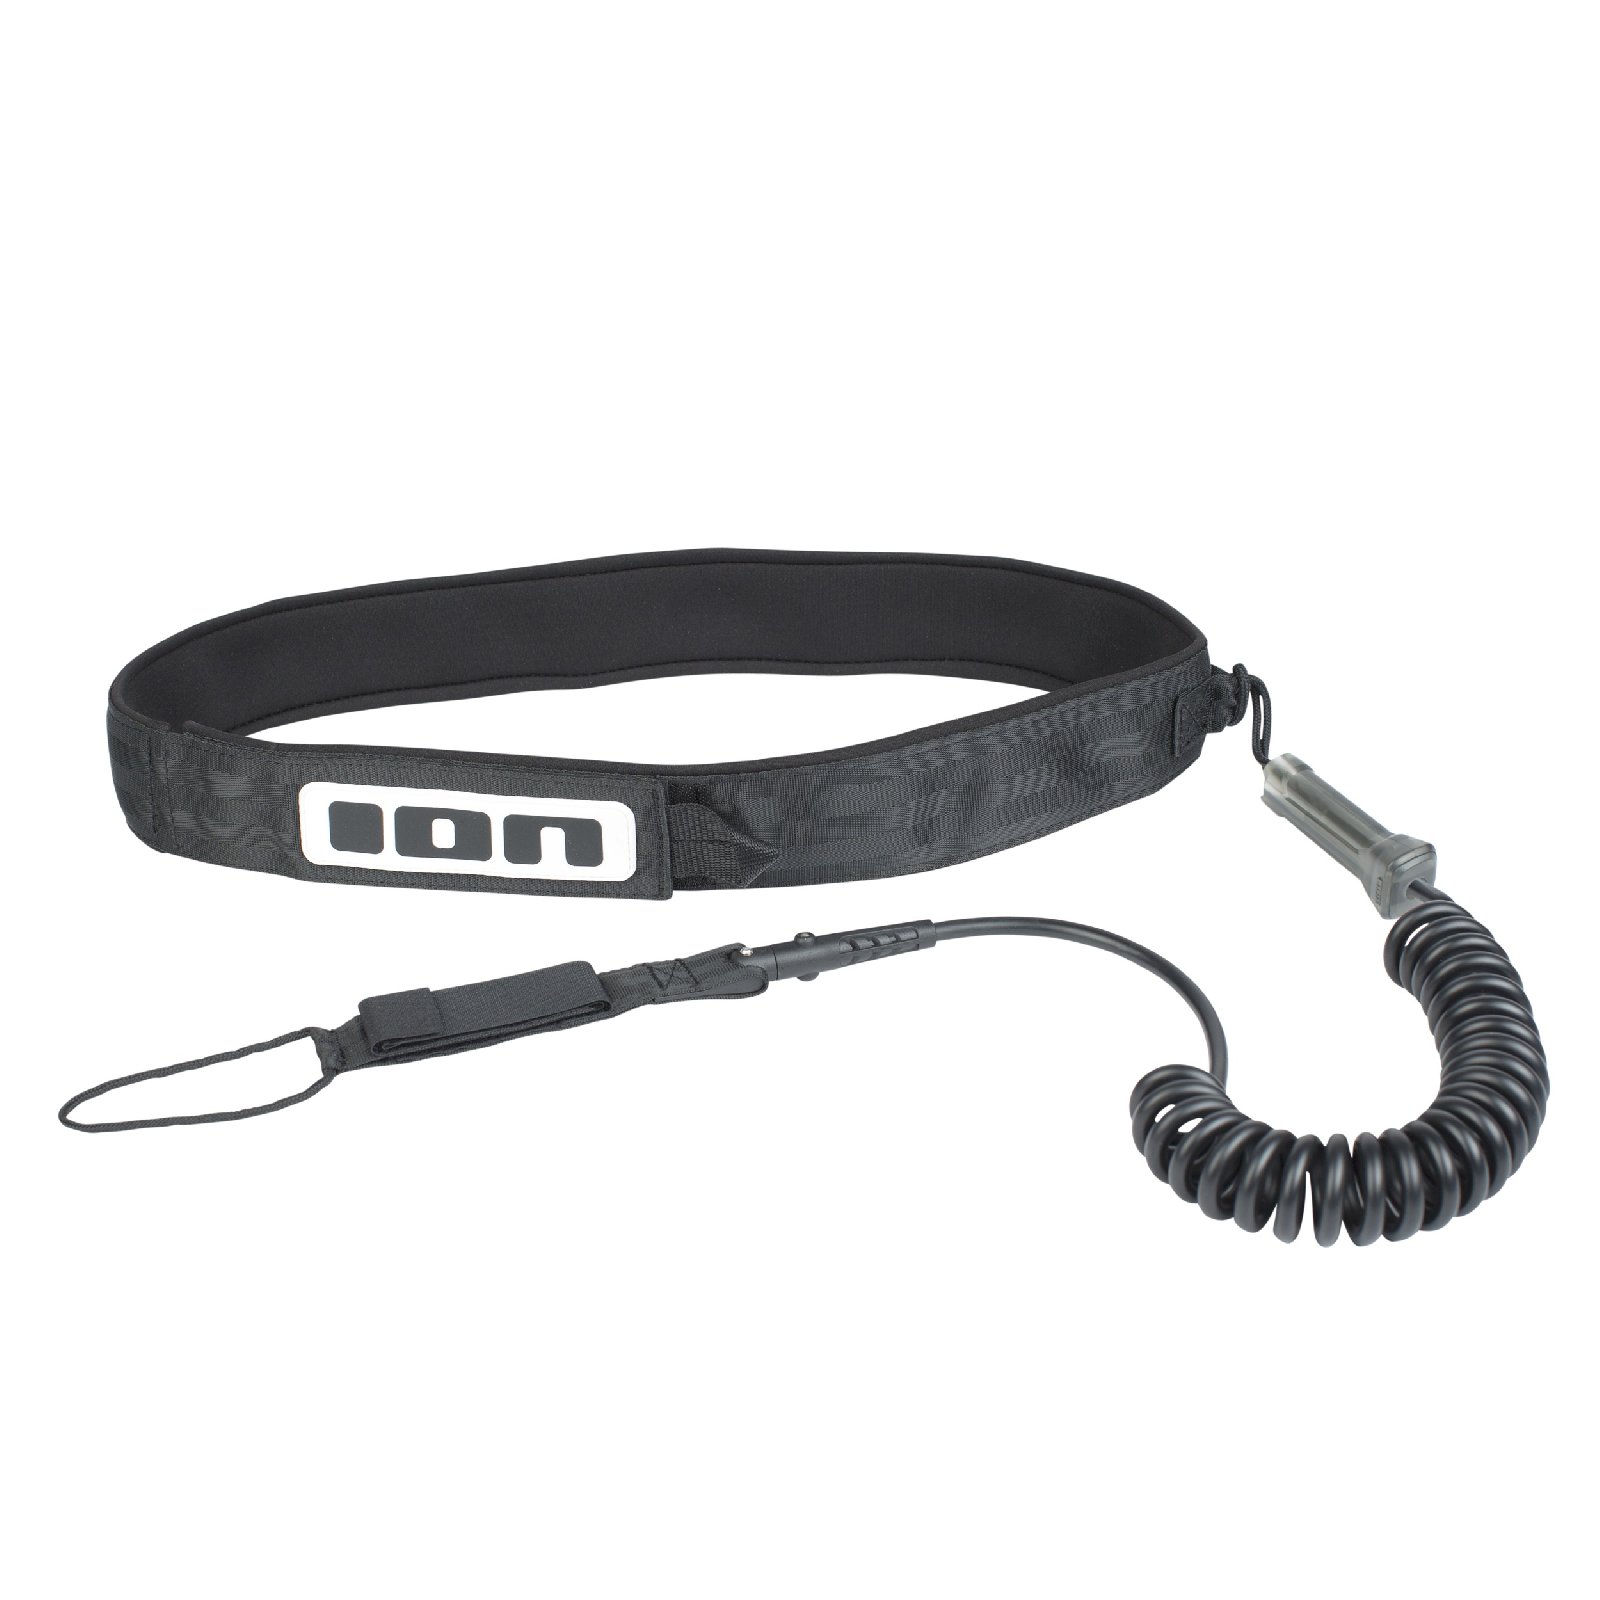 ION  SUP/WING Core Safety Leash incl. Hip Belt 10' (S-M)  (48700-7054)  23-